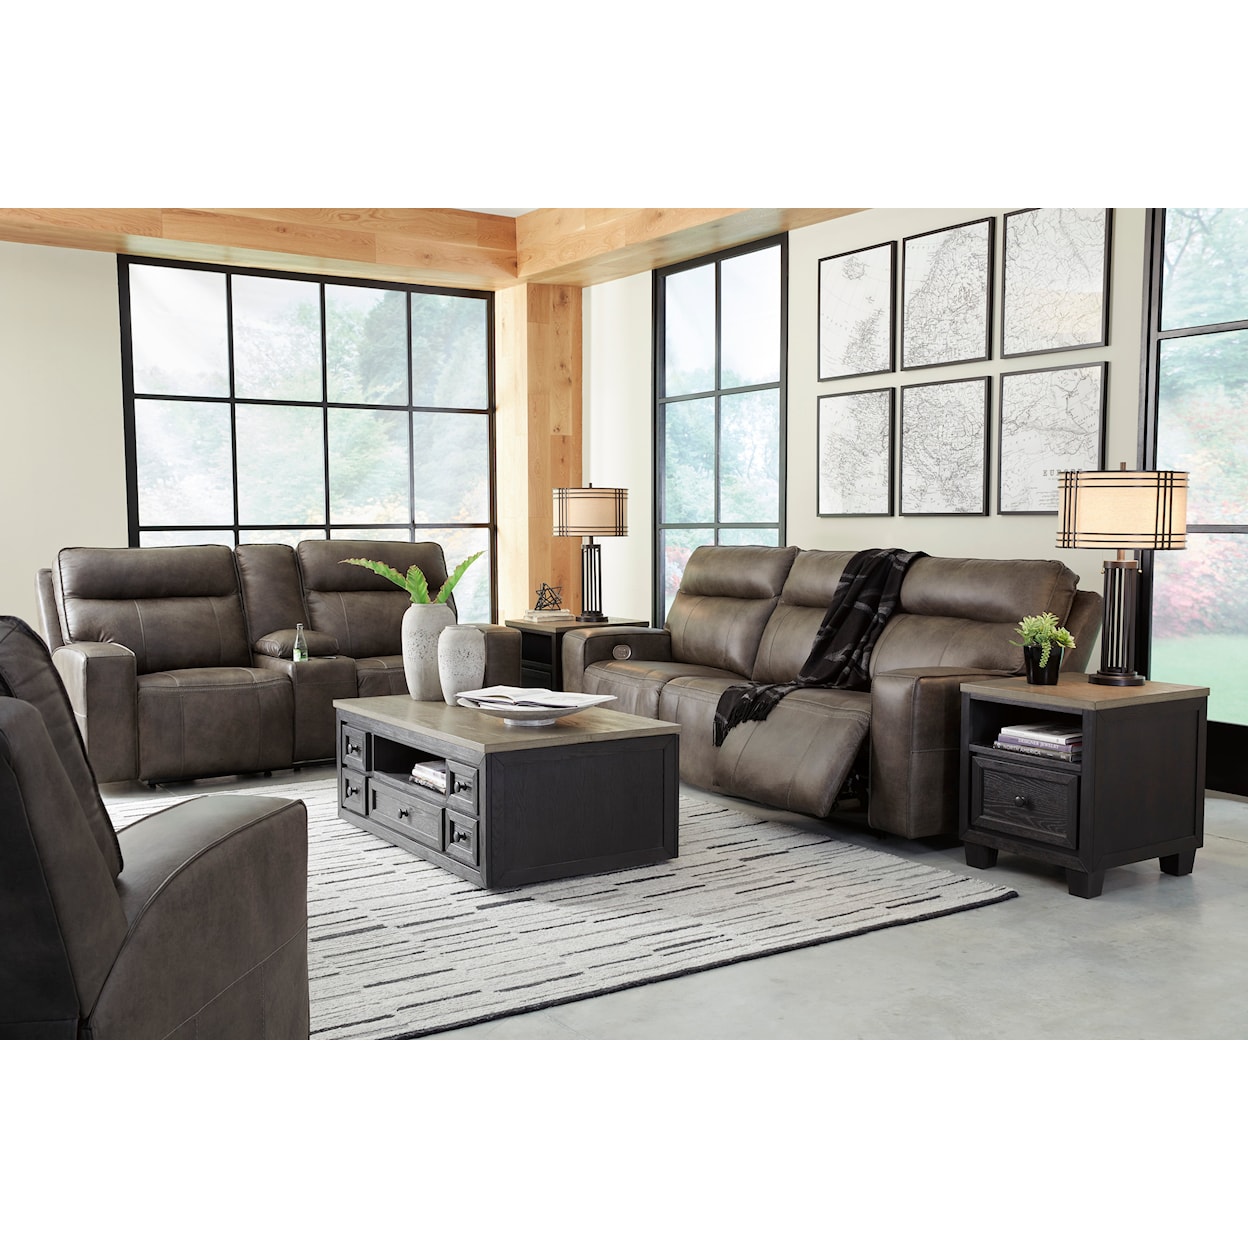 Signature Design by Ashley Game Plan Power Reclining Loveseat